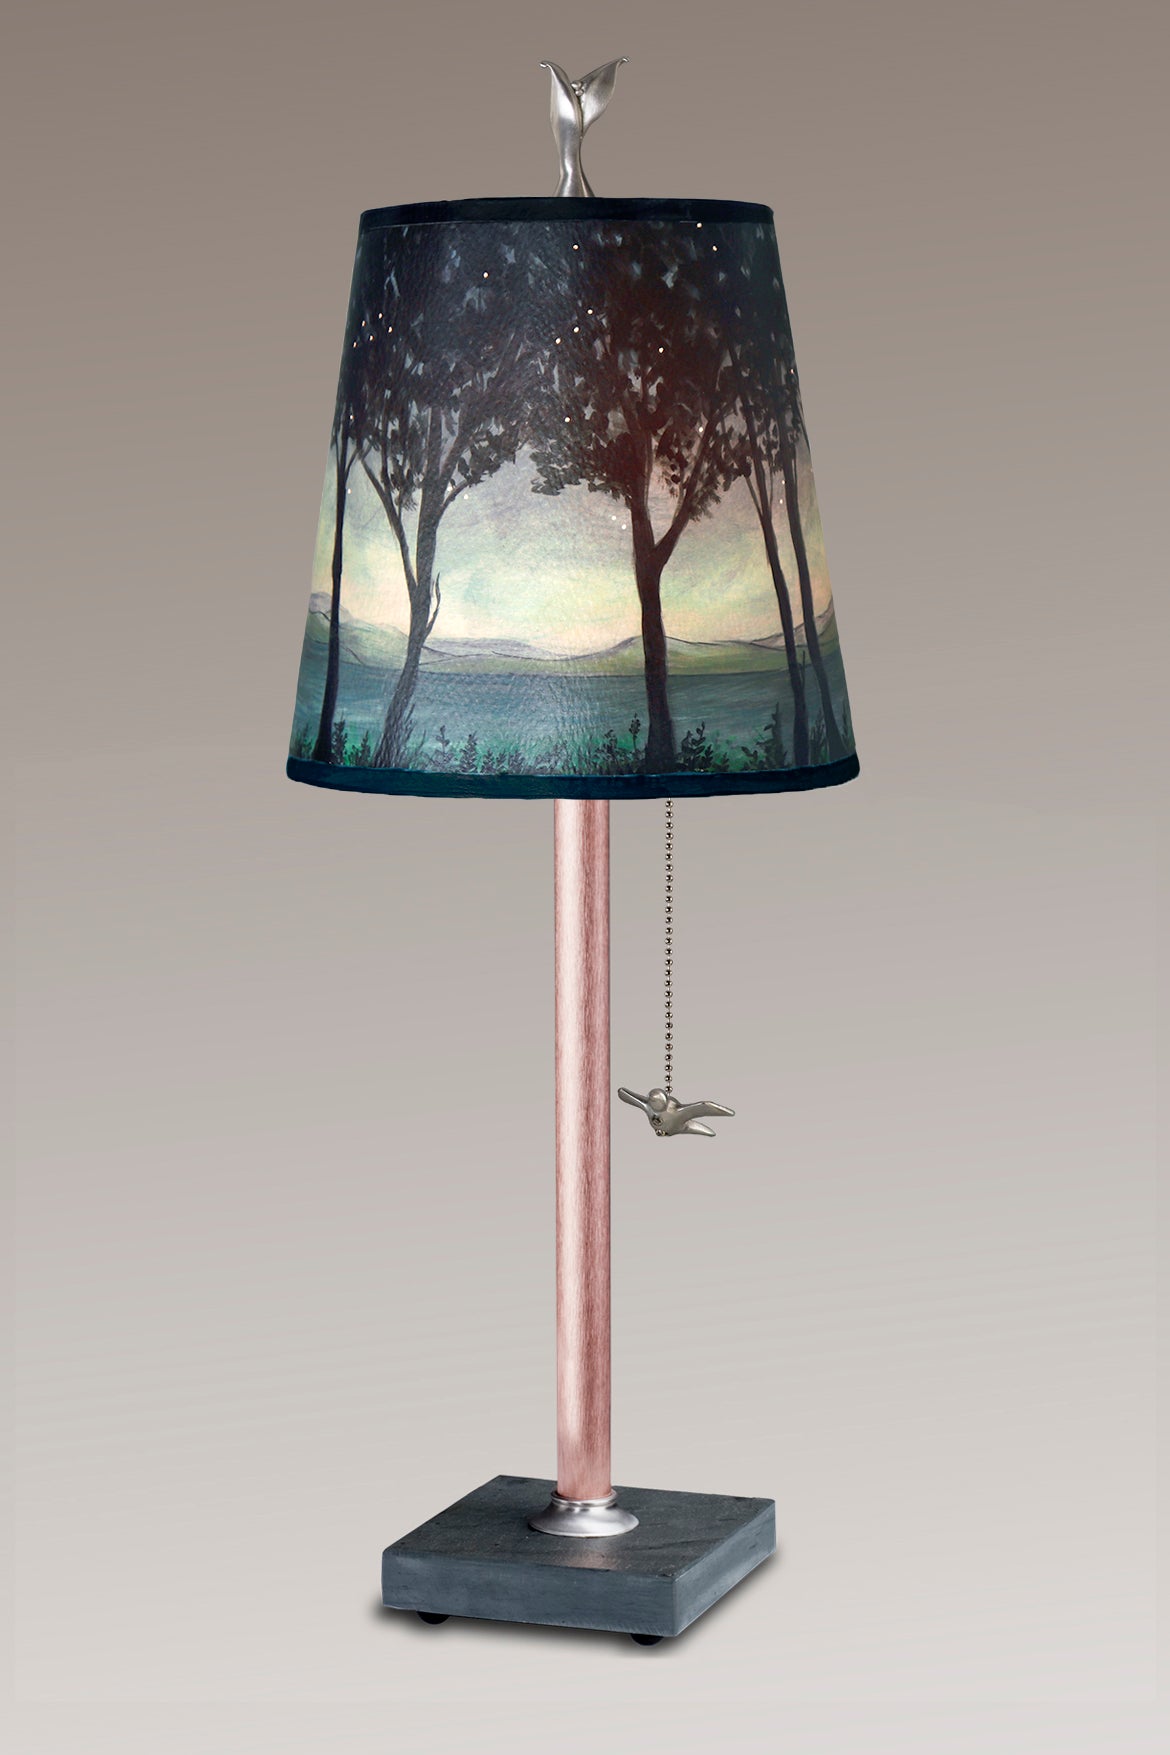 Janna Ugone & Co Table Lamps Copper Table Lamp with Small Drum in Twilight